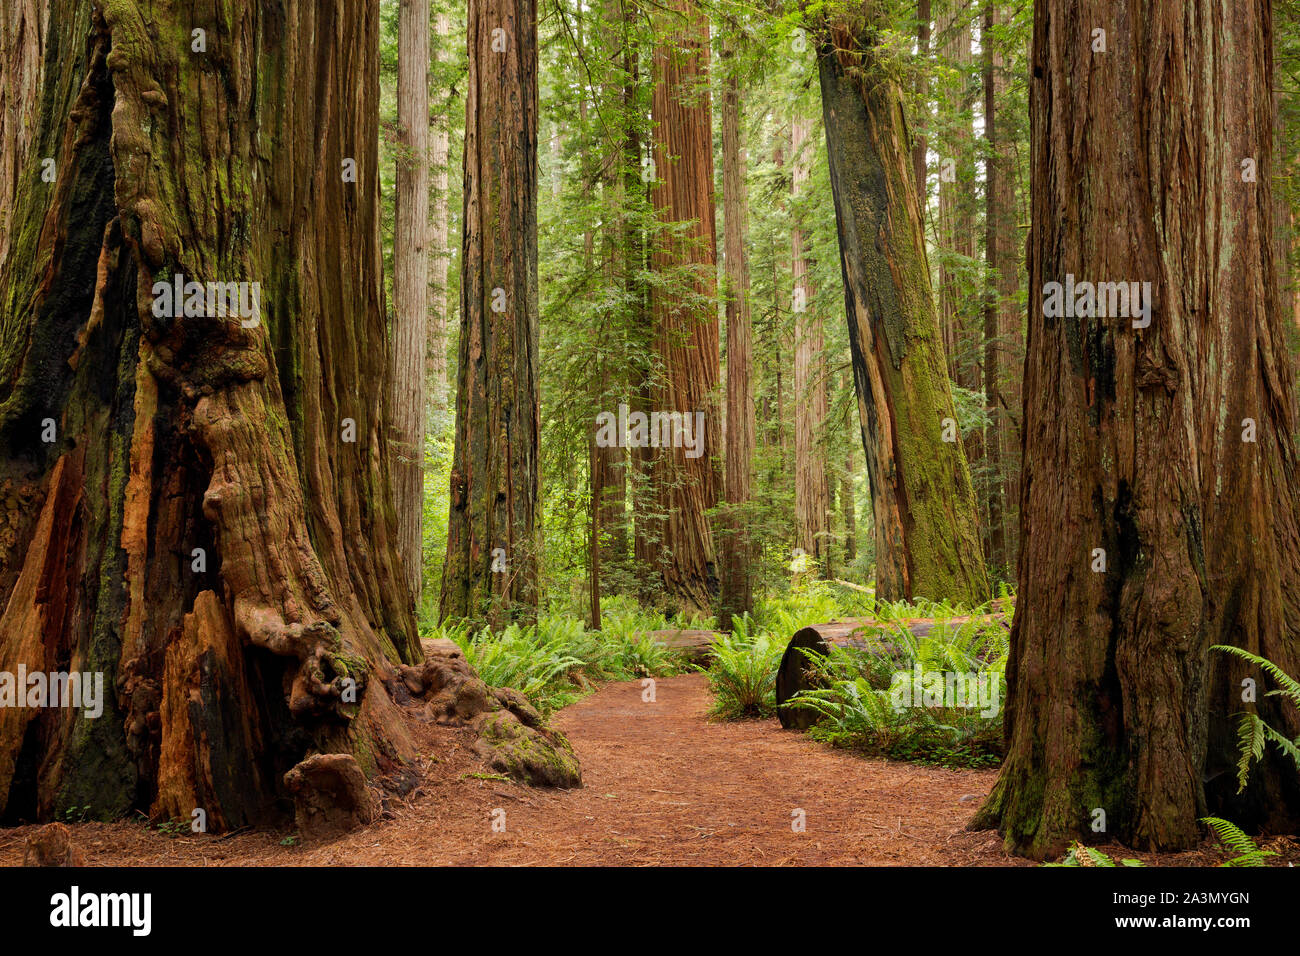 CA03632-00...CALIFORNIA - Loop trail through the redwood trees through Stout Grove in the Jedediah Smith Redwoods State Park. Stock Photo